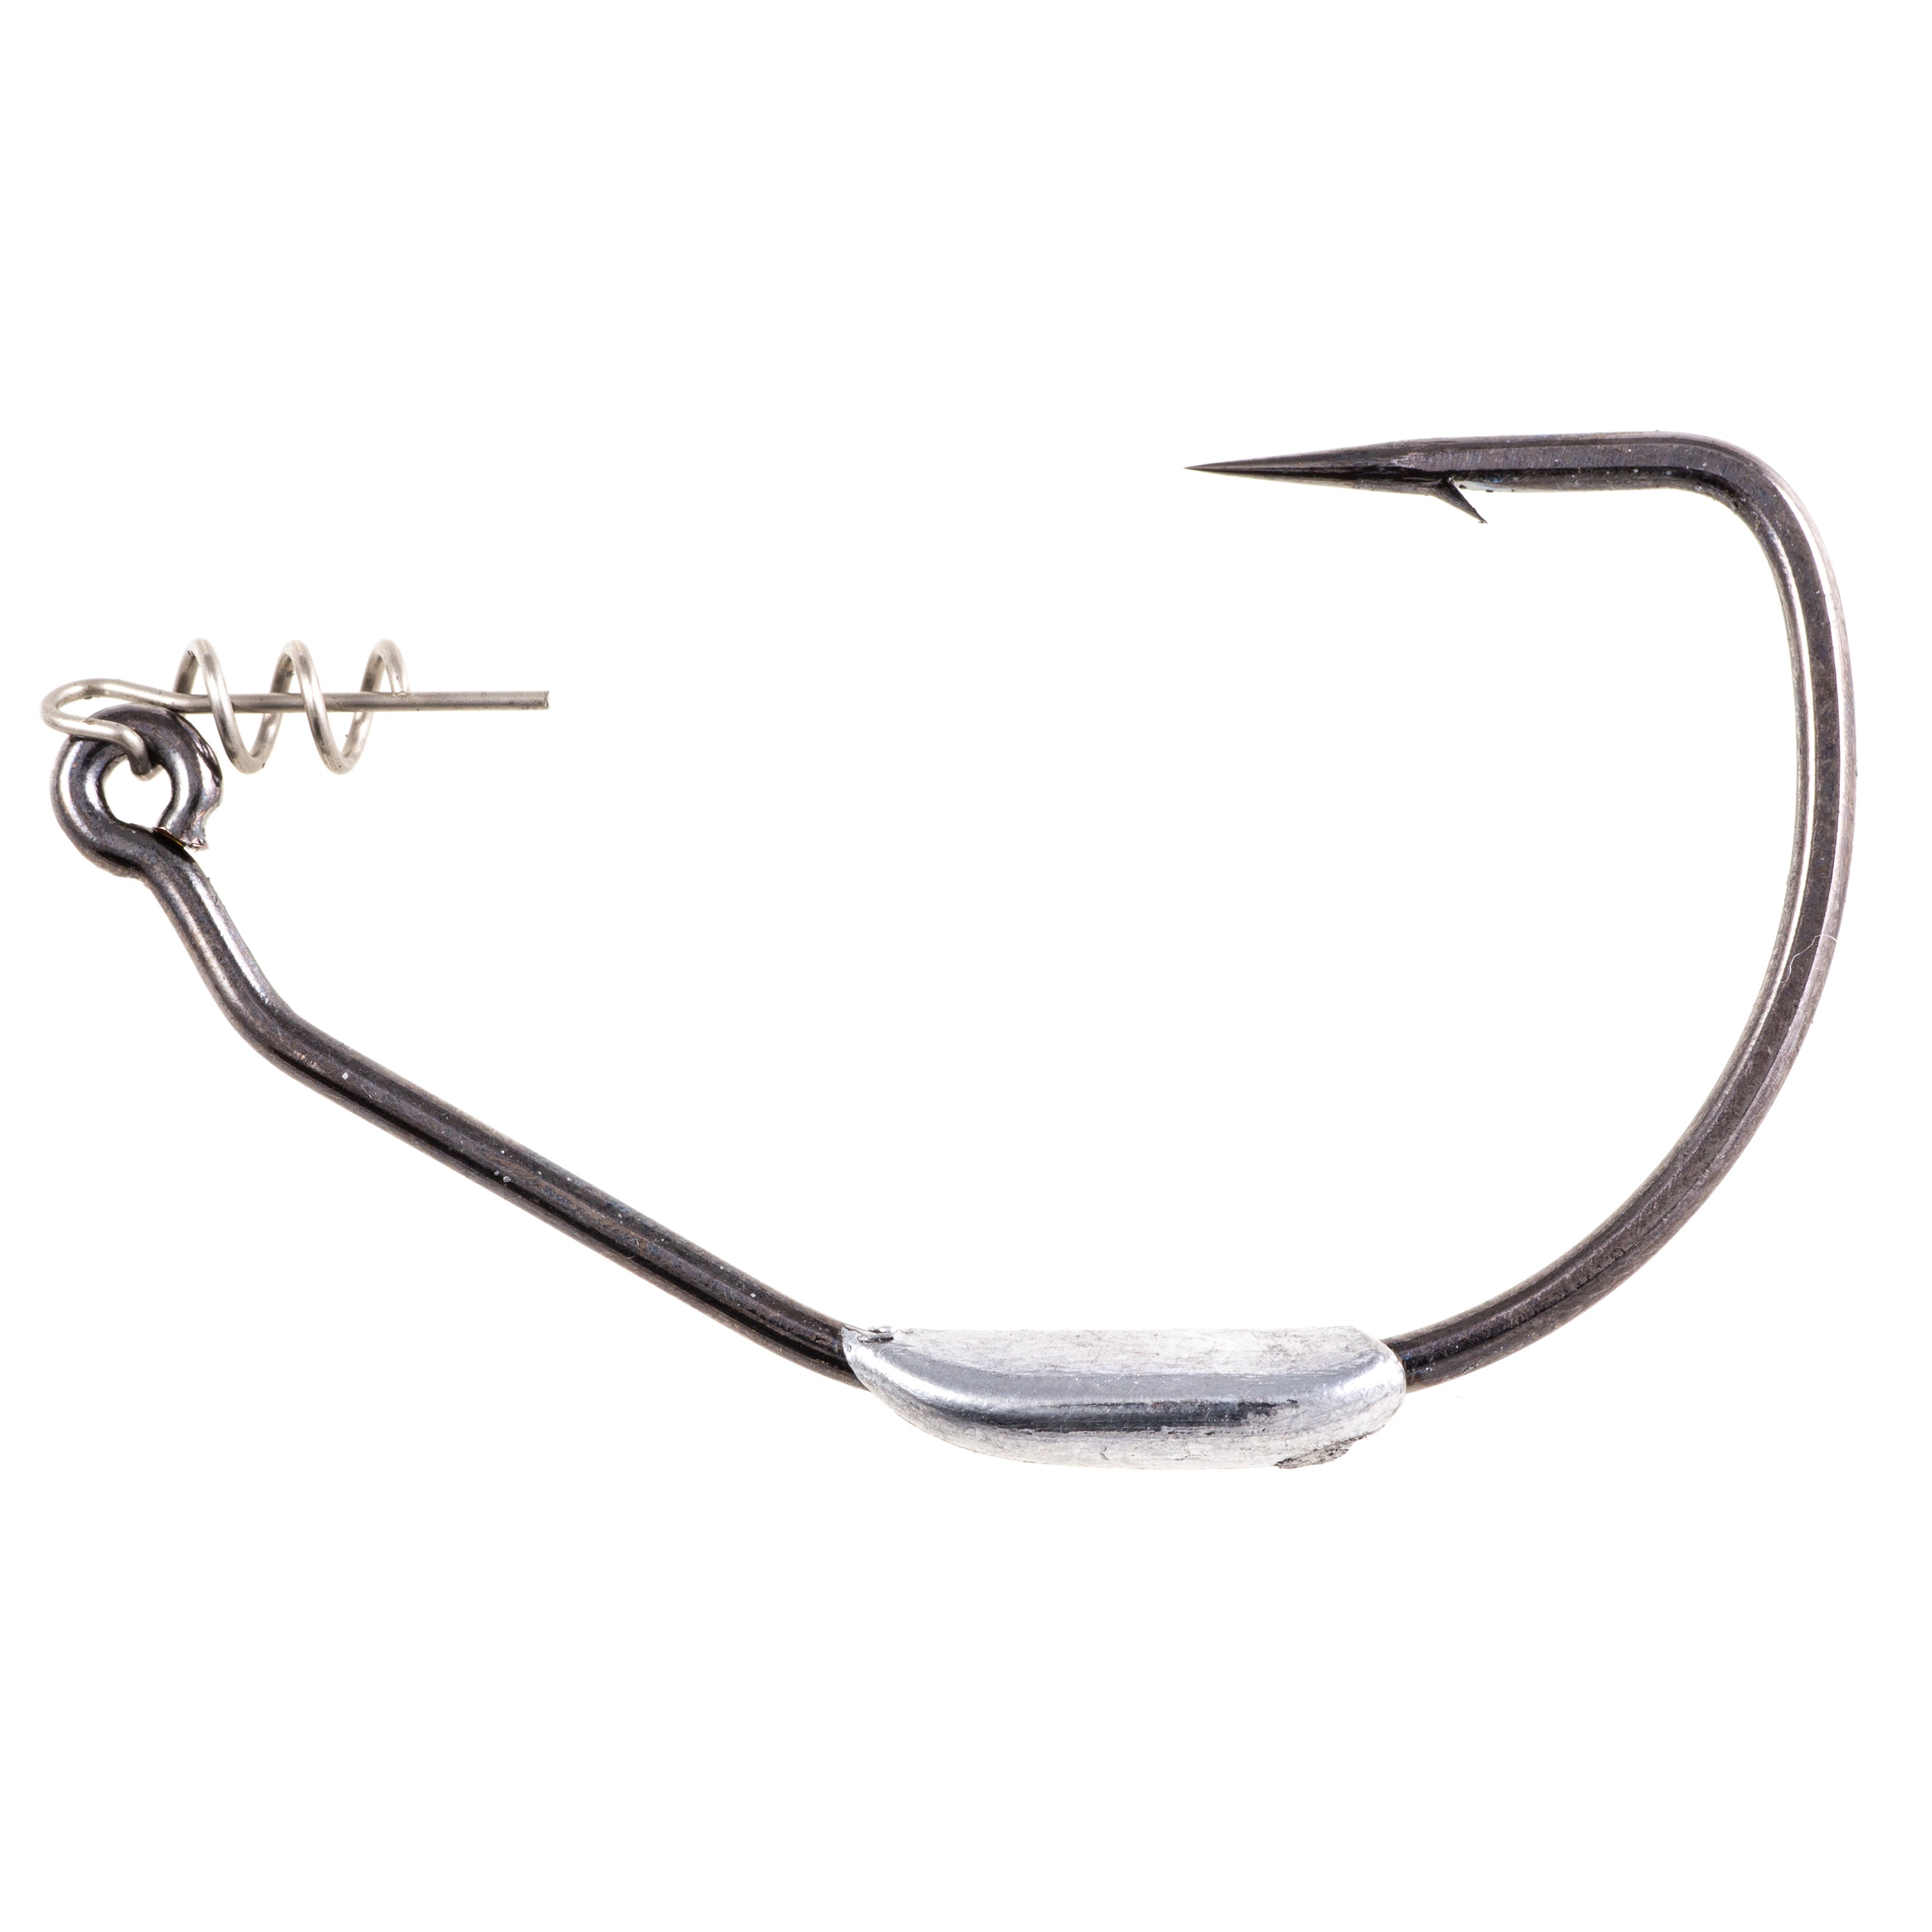 Titan Diver Weighted Swimbait Hook - Capt. Harry's Fishing Supply